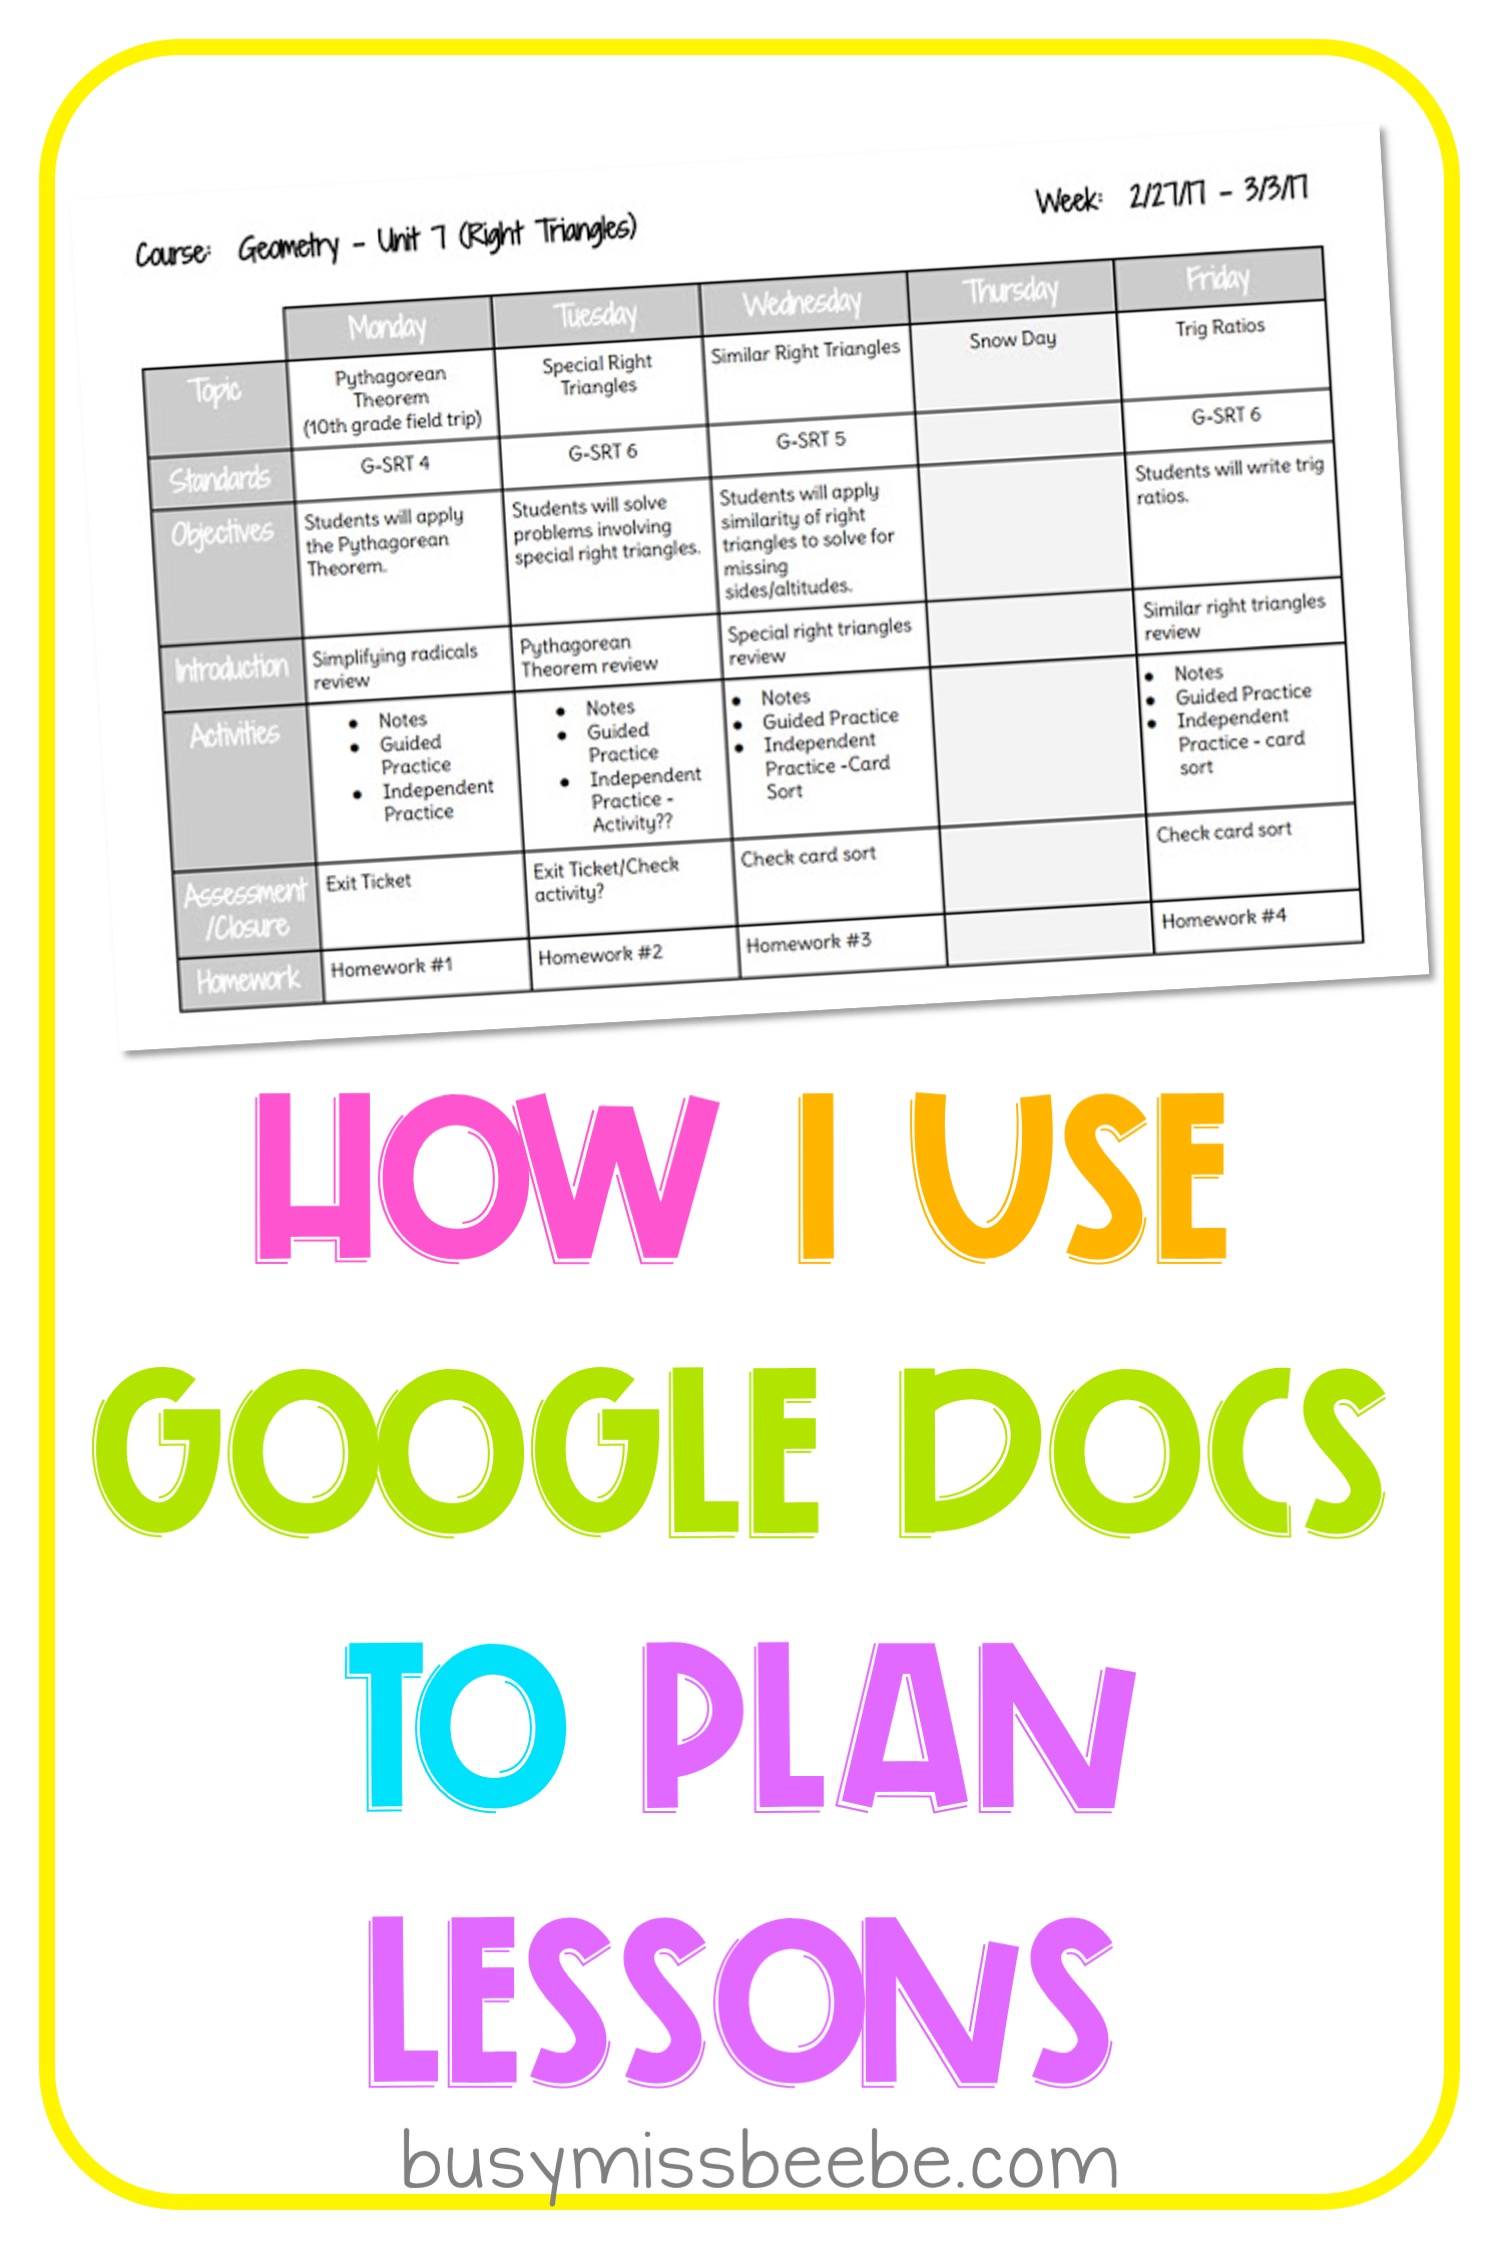 google-docs-lesson-plans-template-busy-miss-beebe